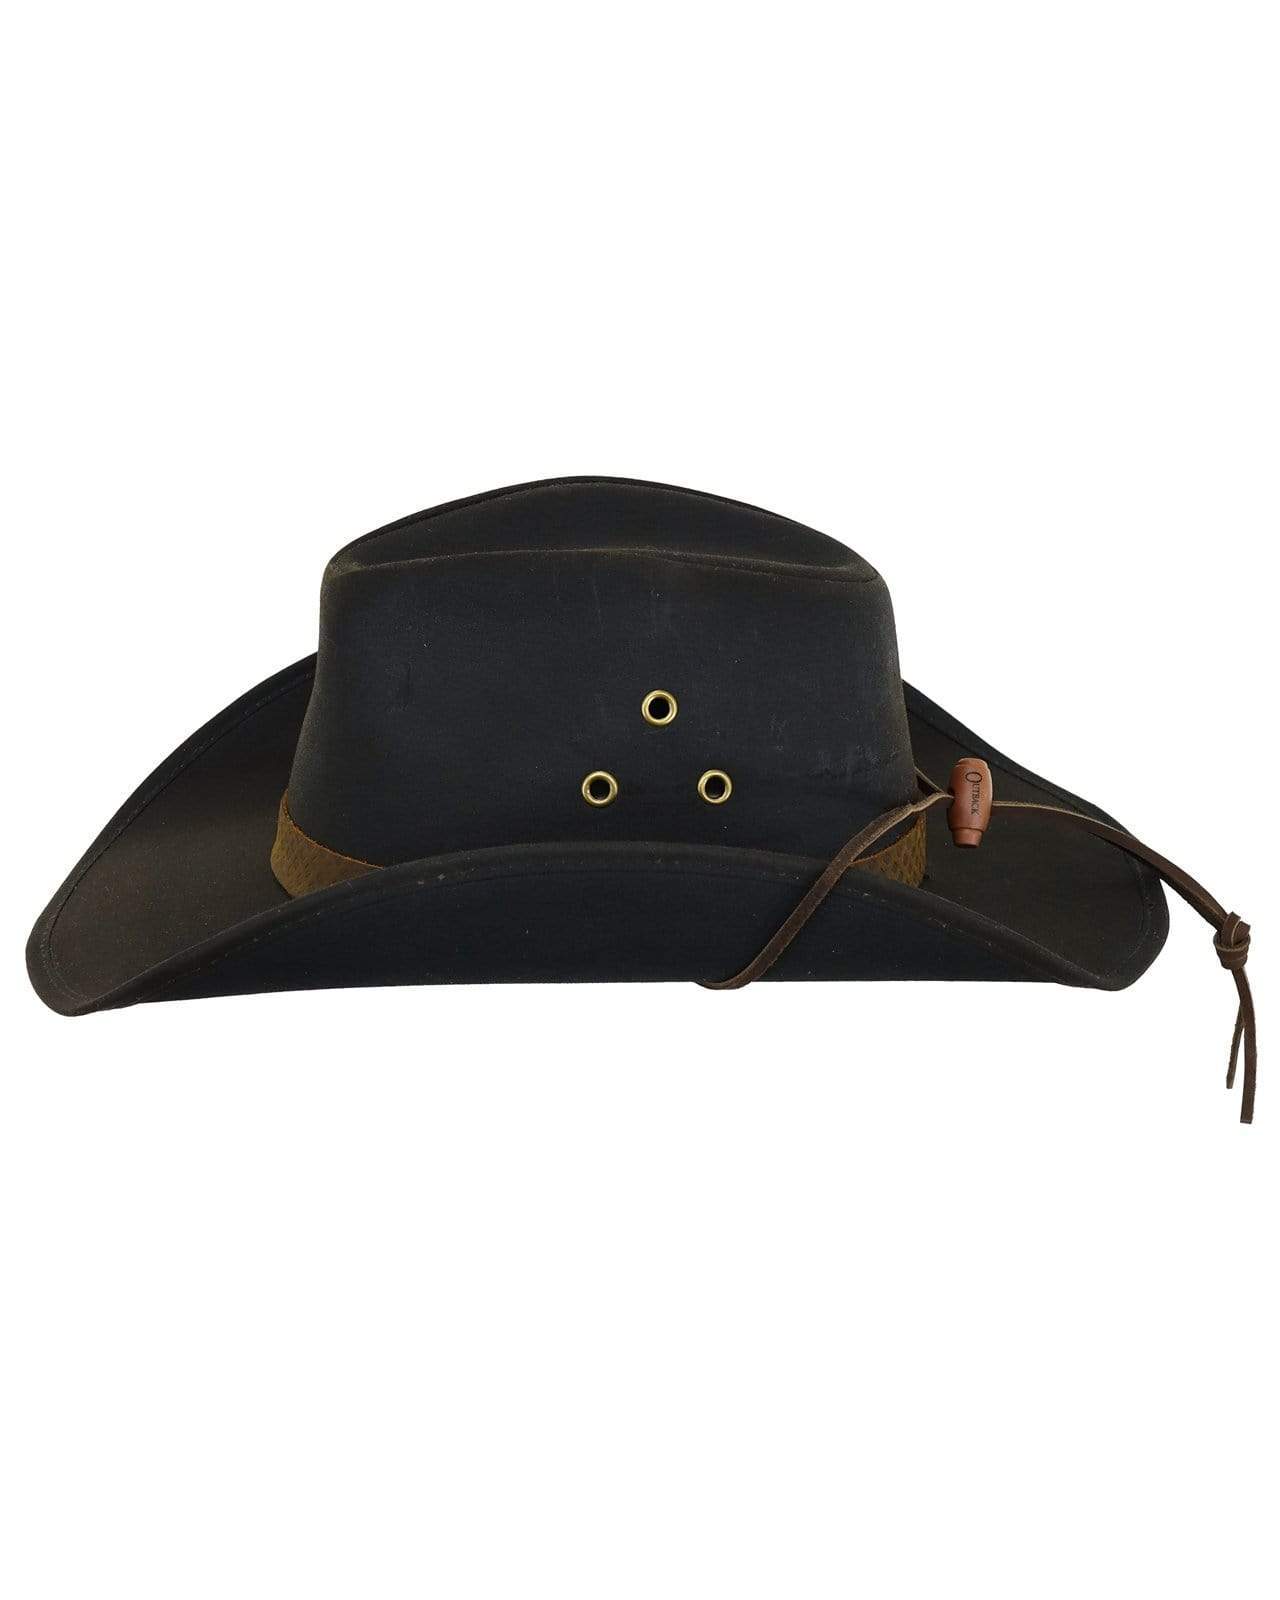 Outback Trading Company Trapper Hats